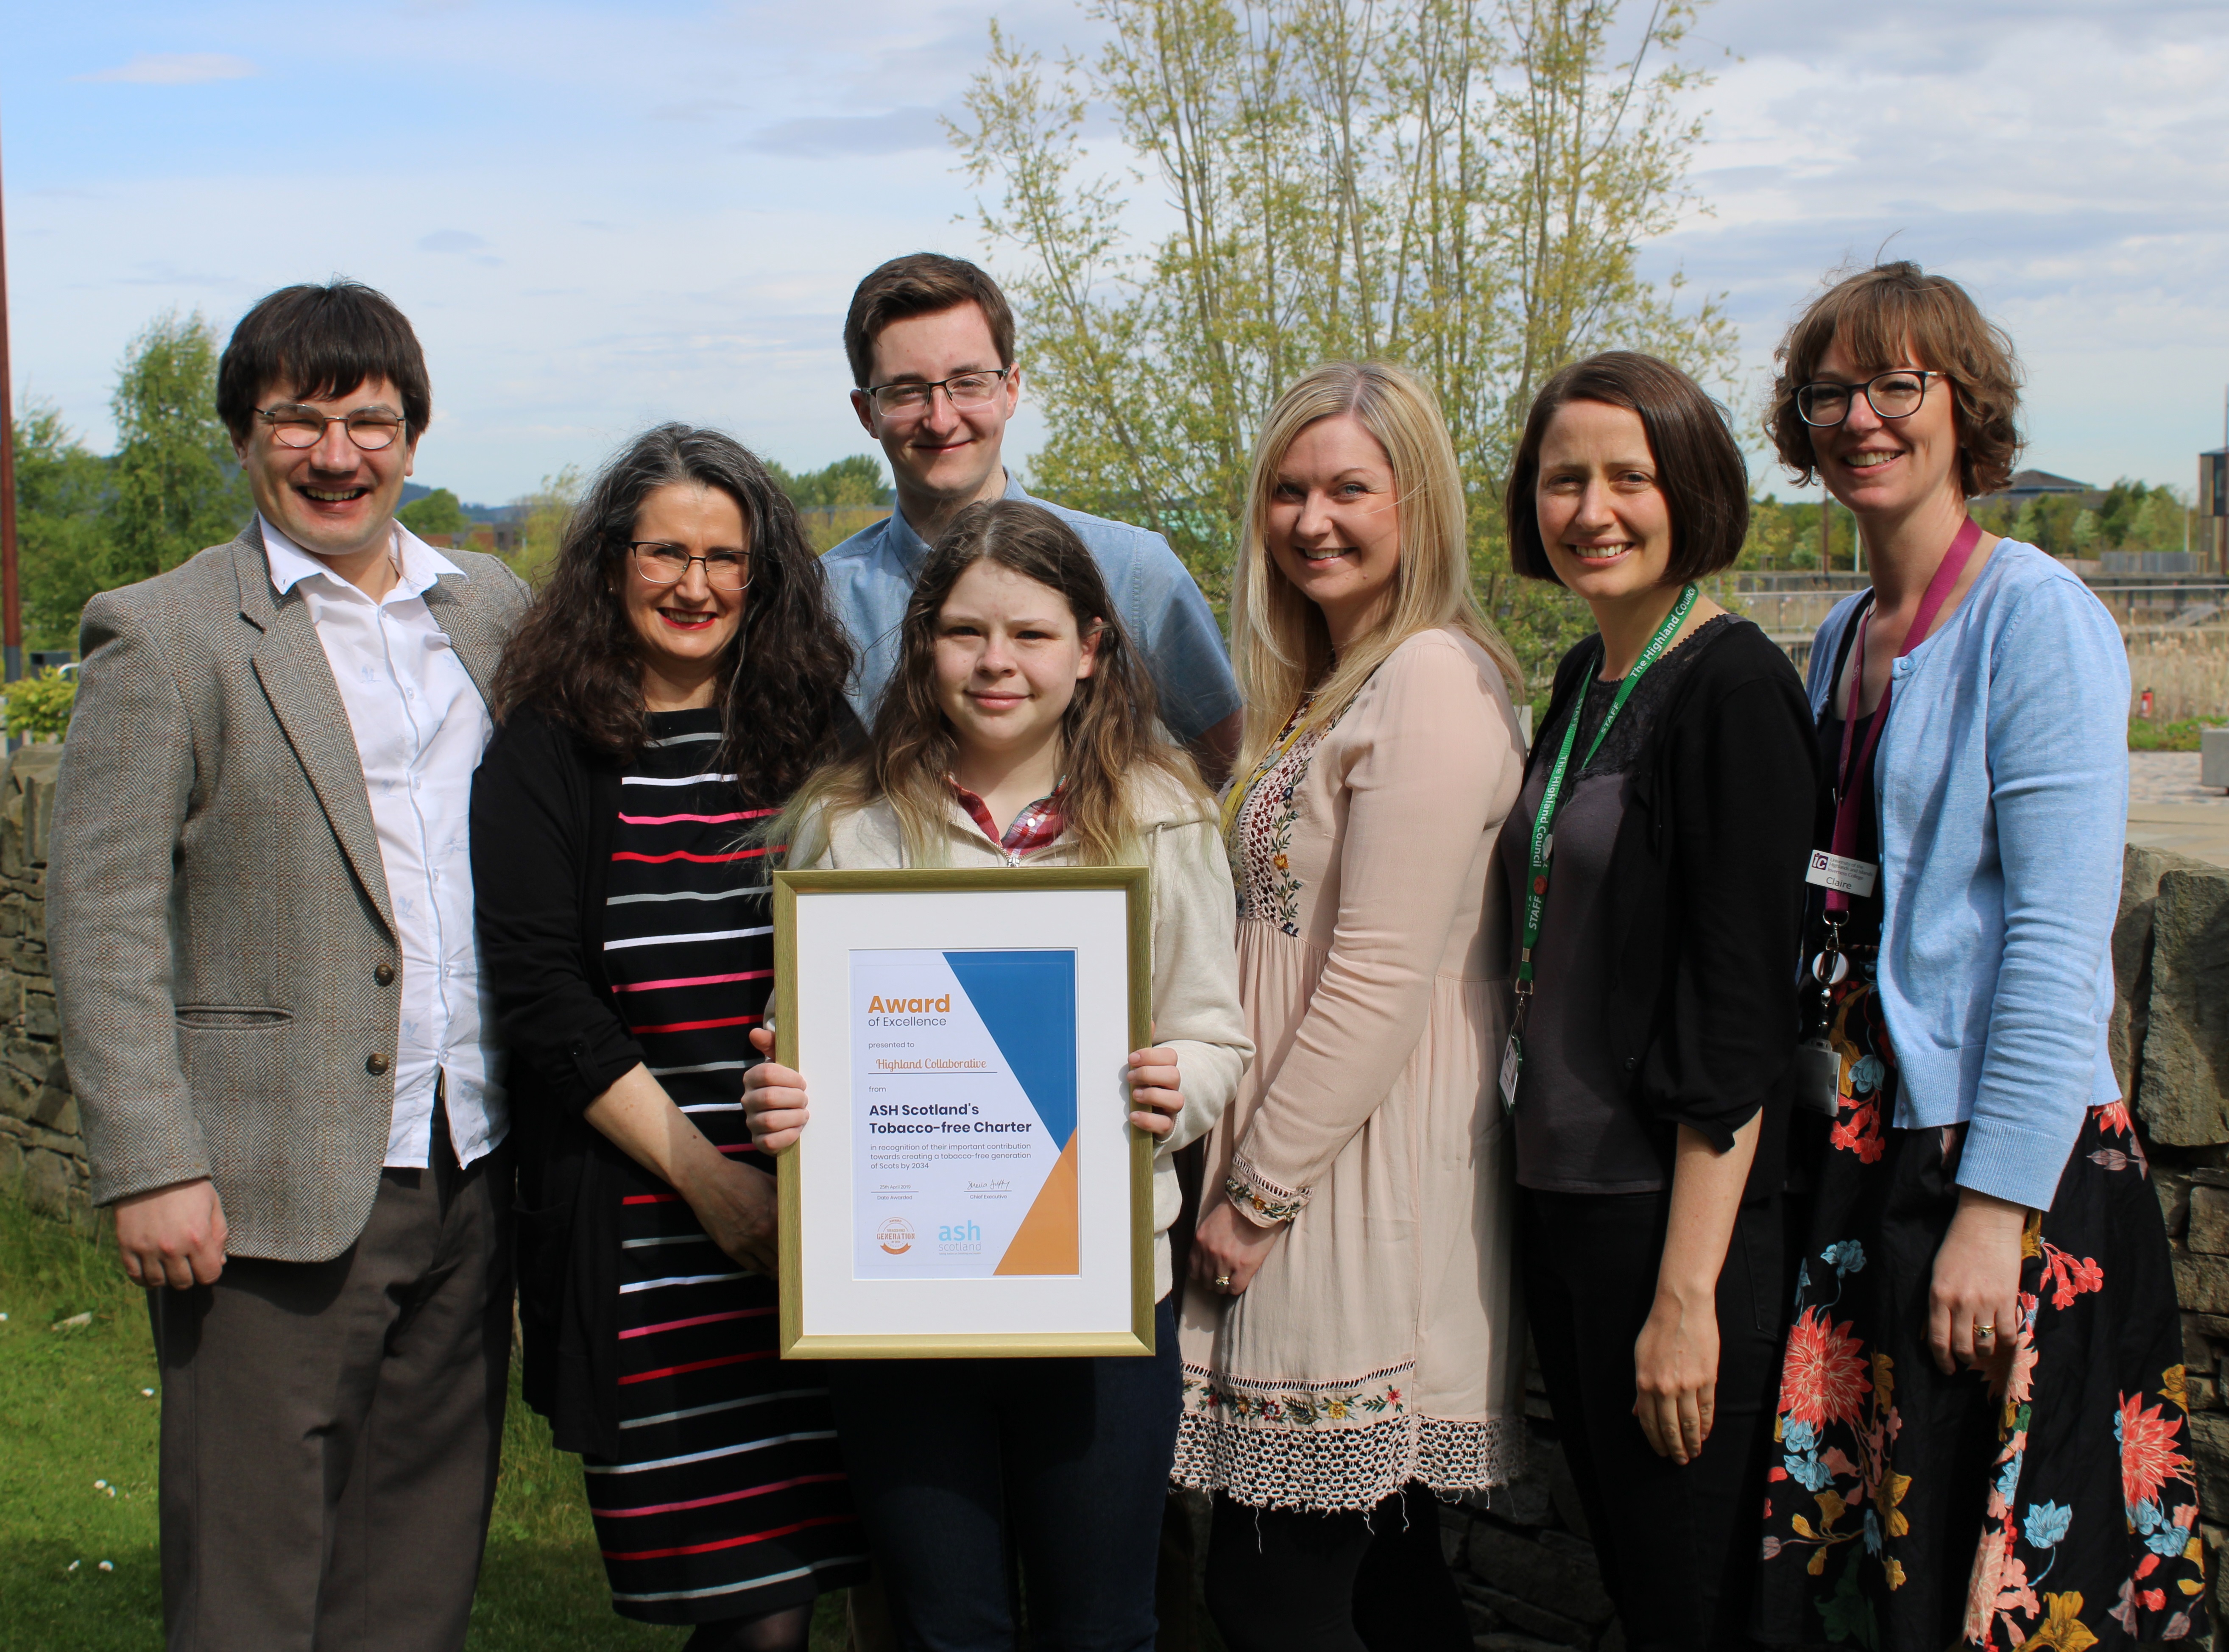 Representatives of the joint Highland initiative were successful in receiving commendation from Scotland’s Charter for a Tobacco-free Generation.